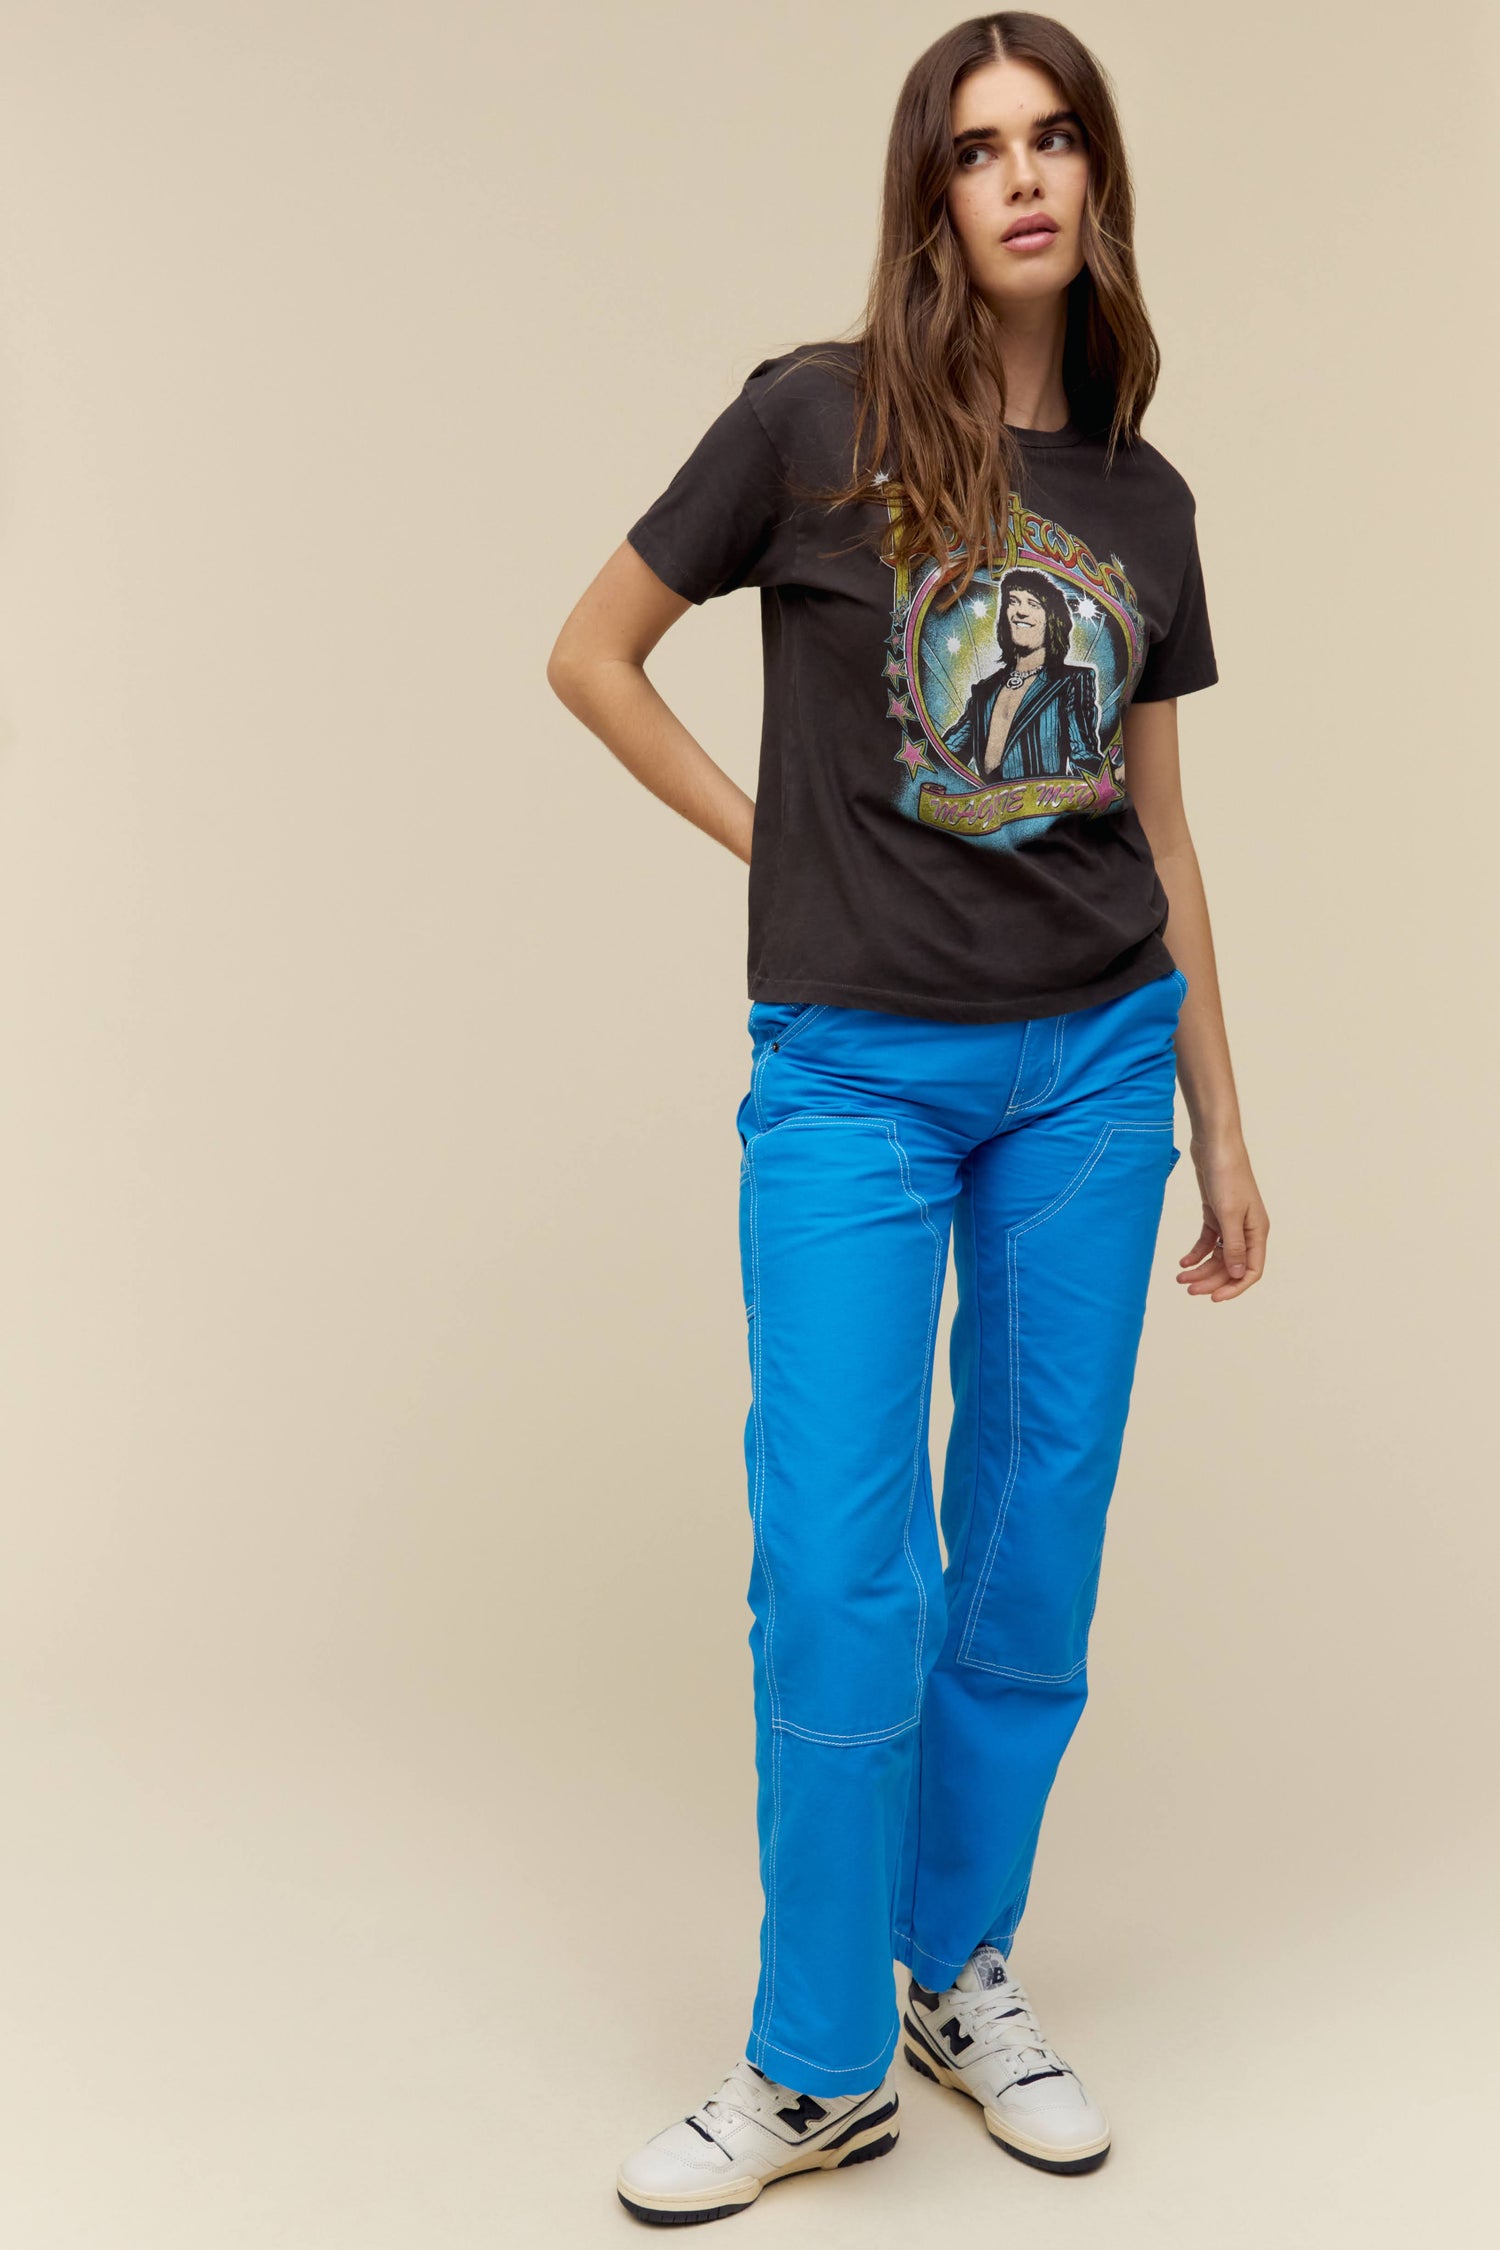 A model featuring a washed black tee stamped with Rod Stewart and a hand-drawn graphic of him center chest.